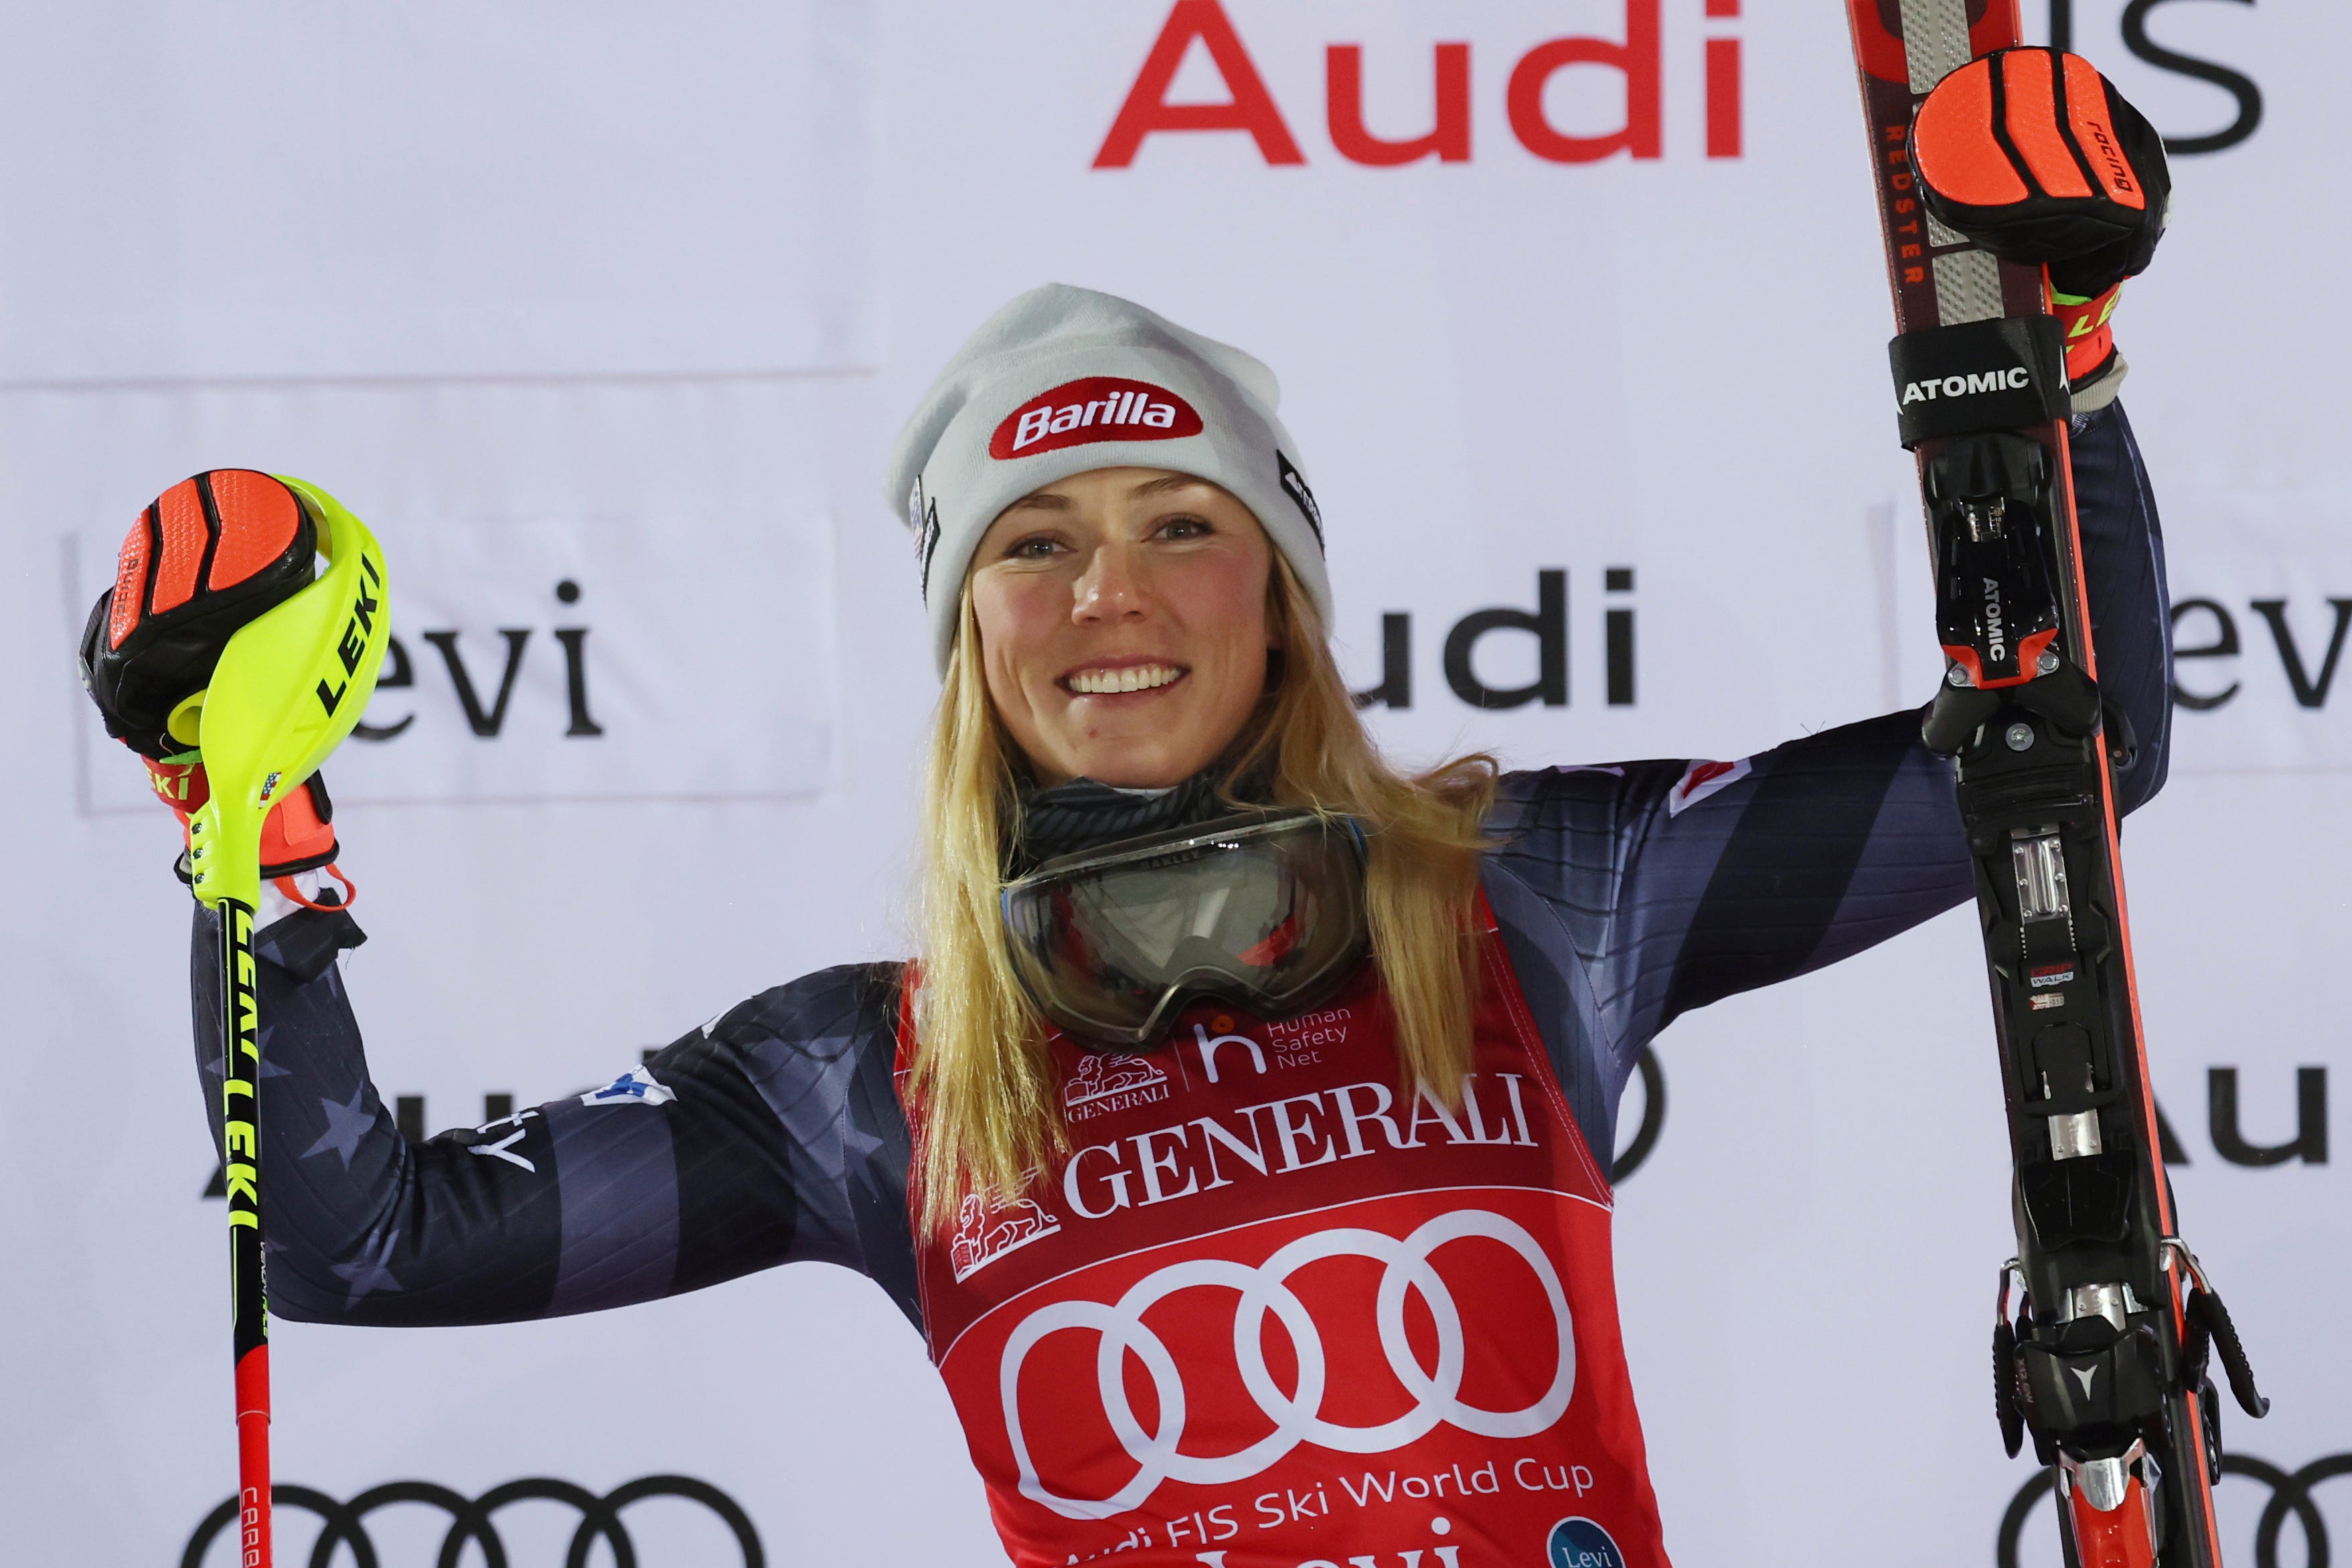 Mikaela Shiffrin makes history, breaks Lindsey Vonn's record for skiing World Cup wins